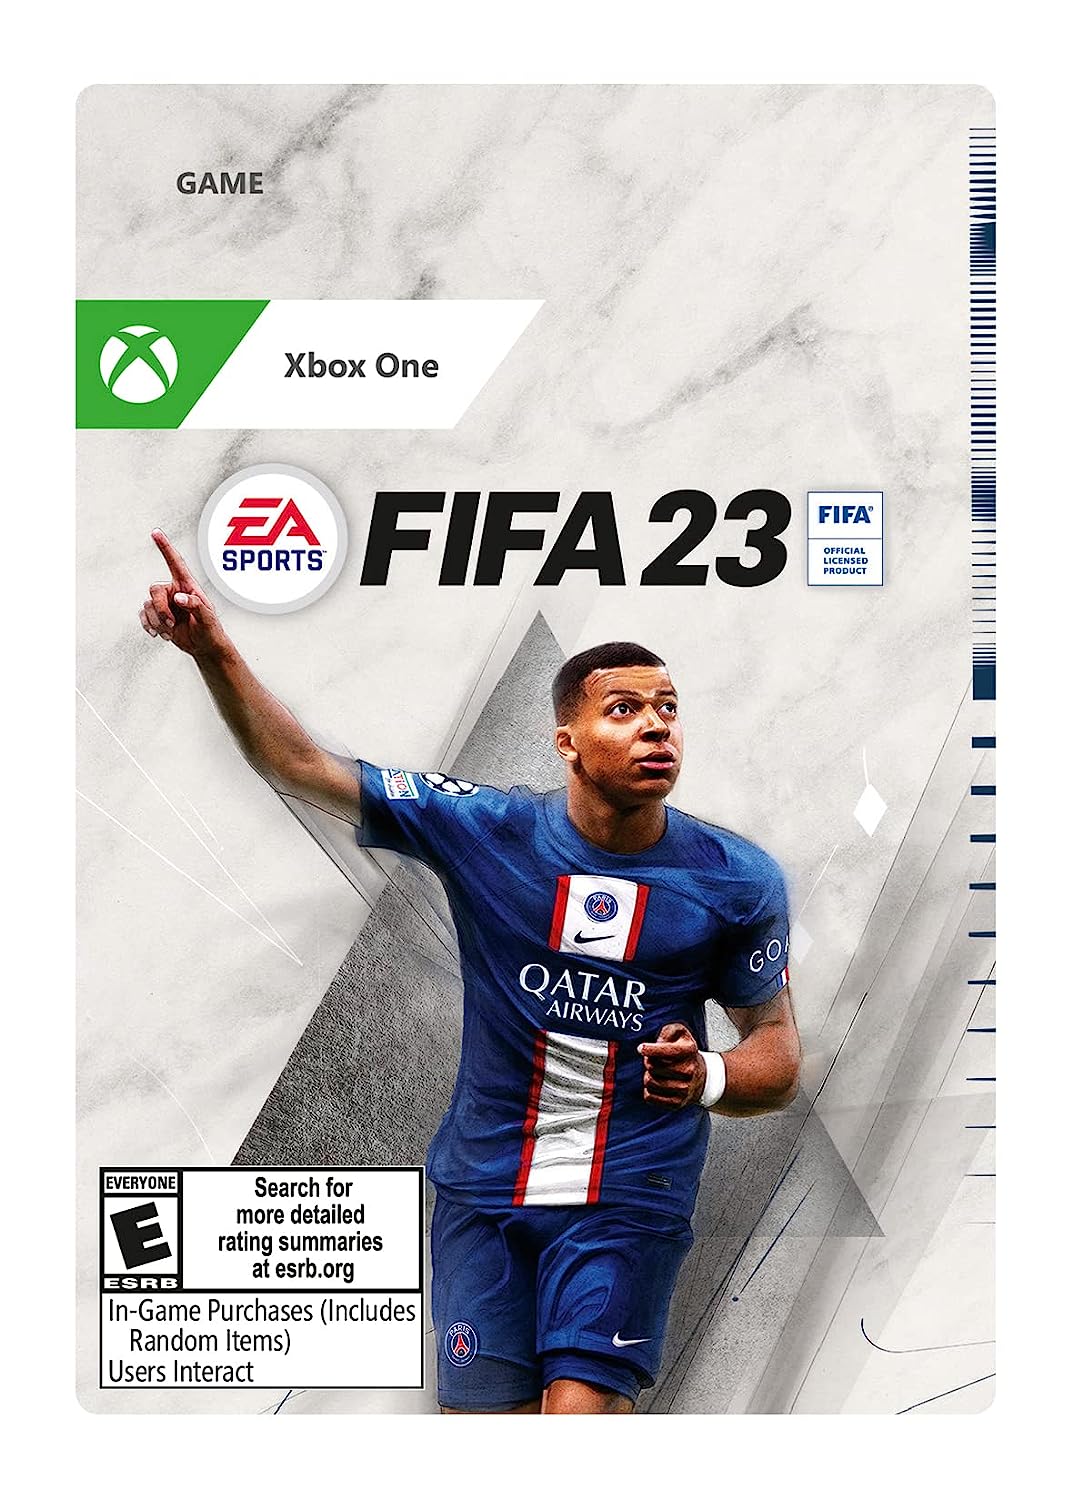 fifa 23 standaard kuku shop amazon email delivery pay with cryptocurrency